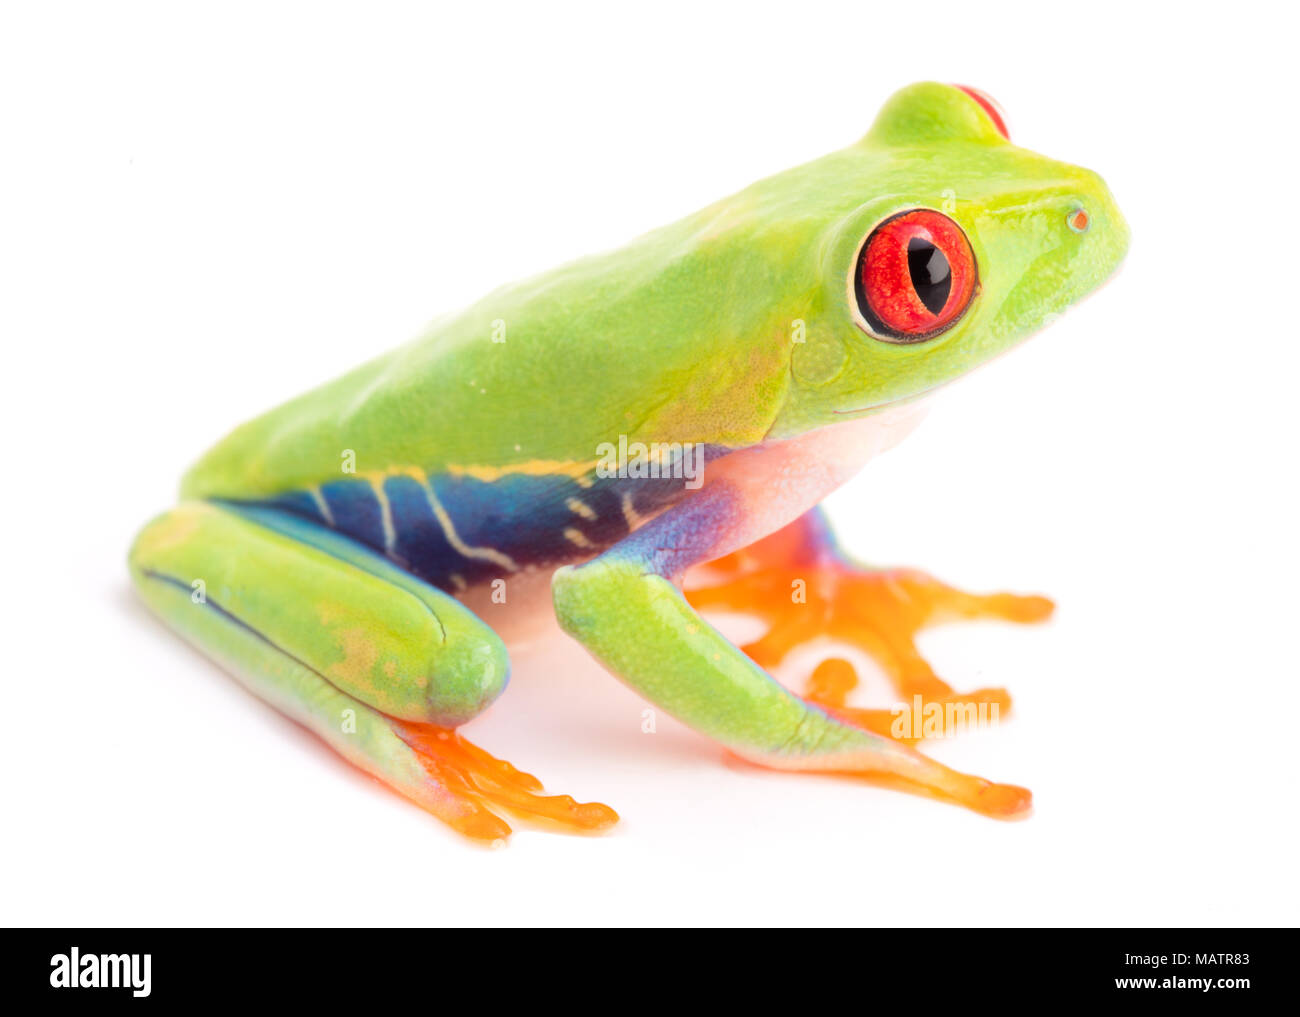 Agalychnis callidryas or the red eyed monkey tree frog, from the rain forest of Panama and Costa Rica isolated on white. Stock Photo